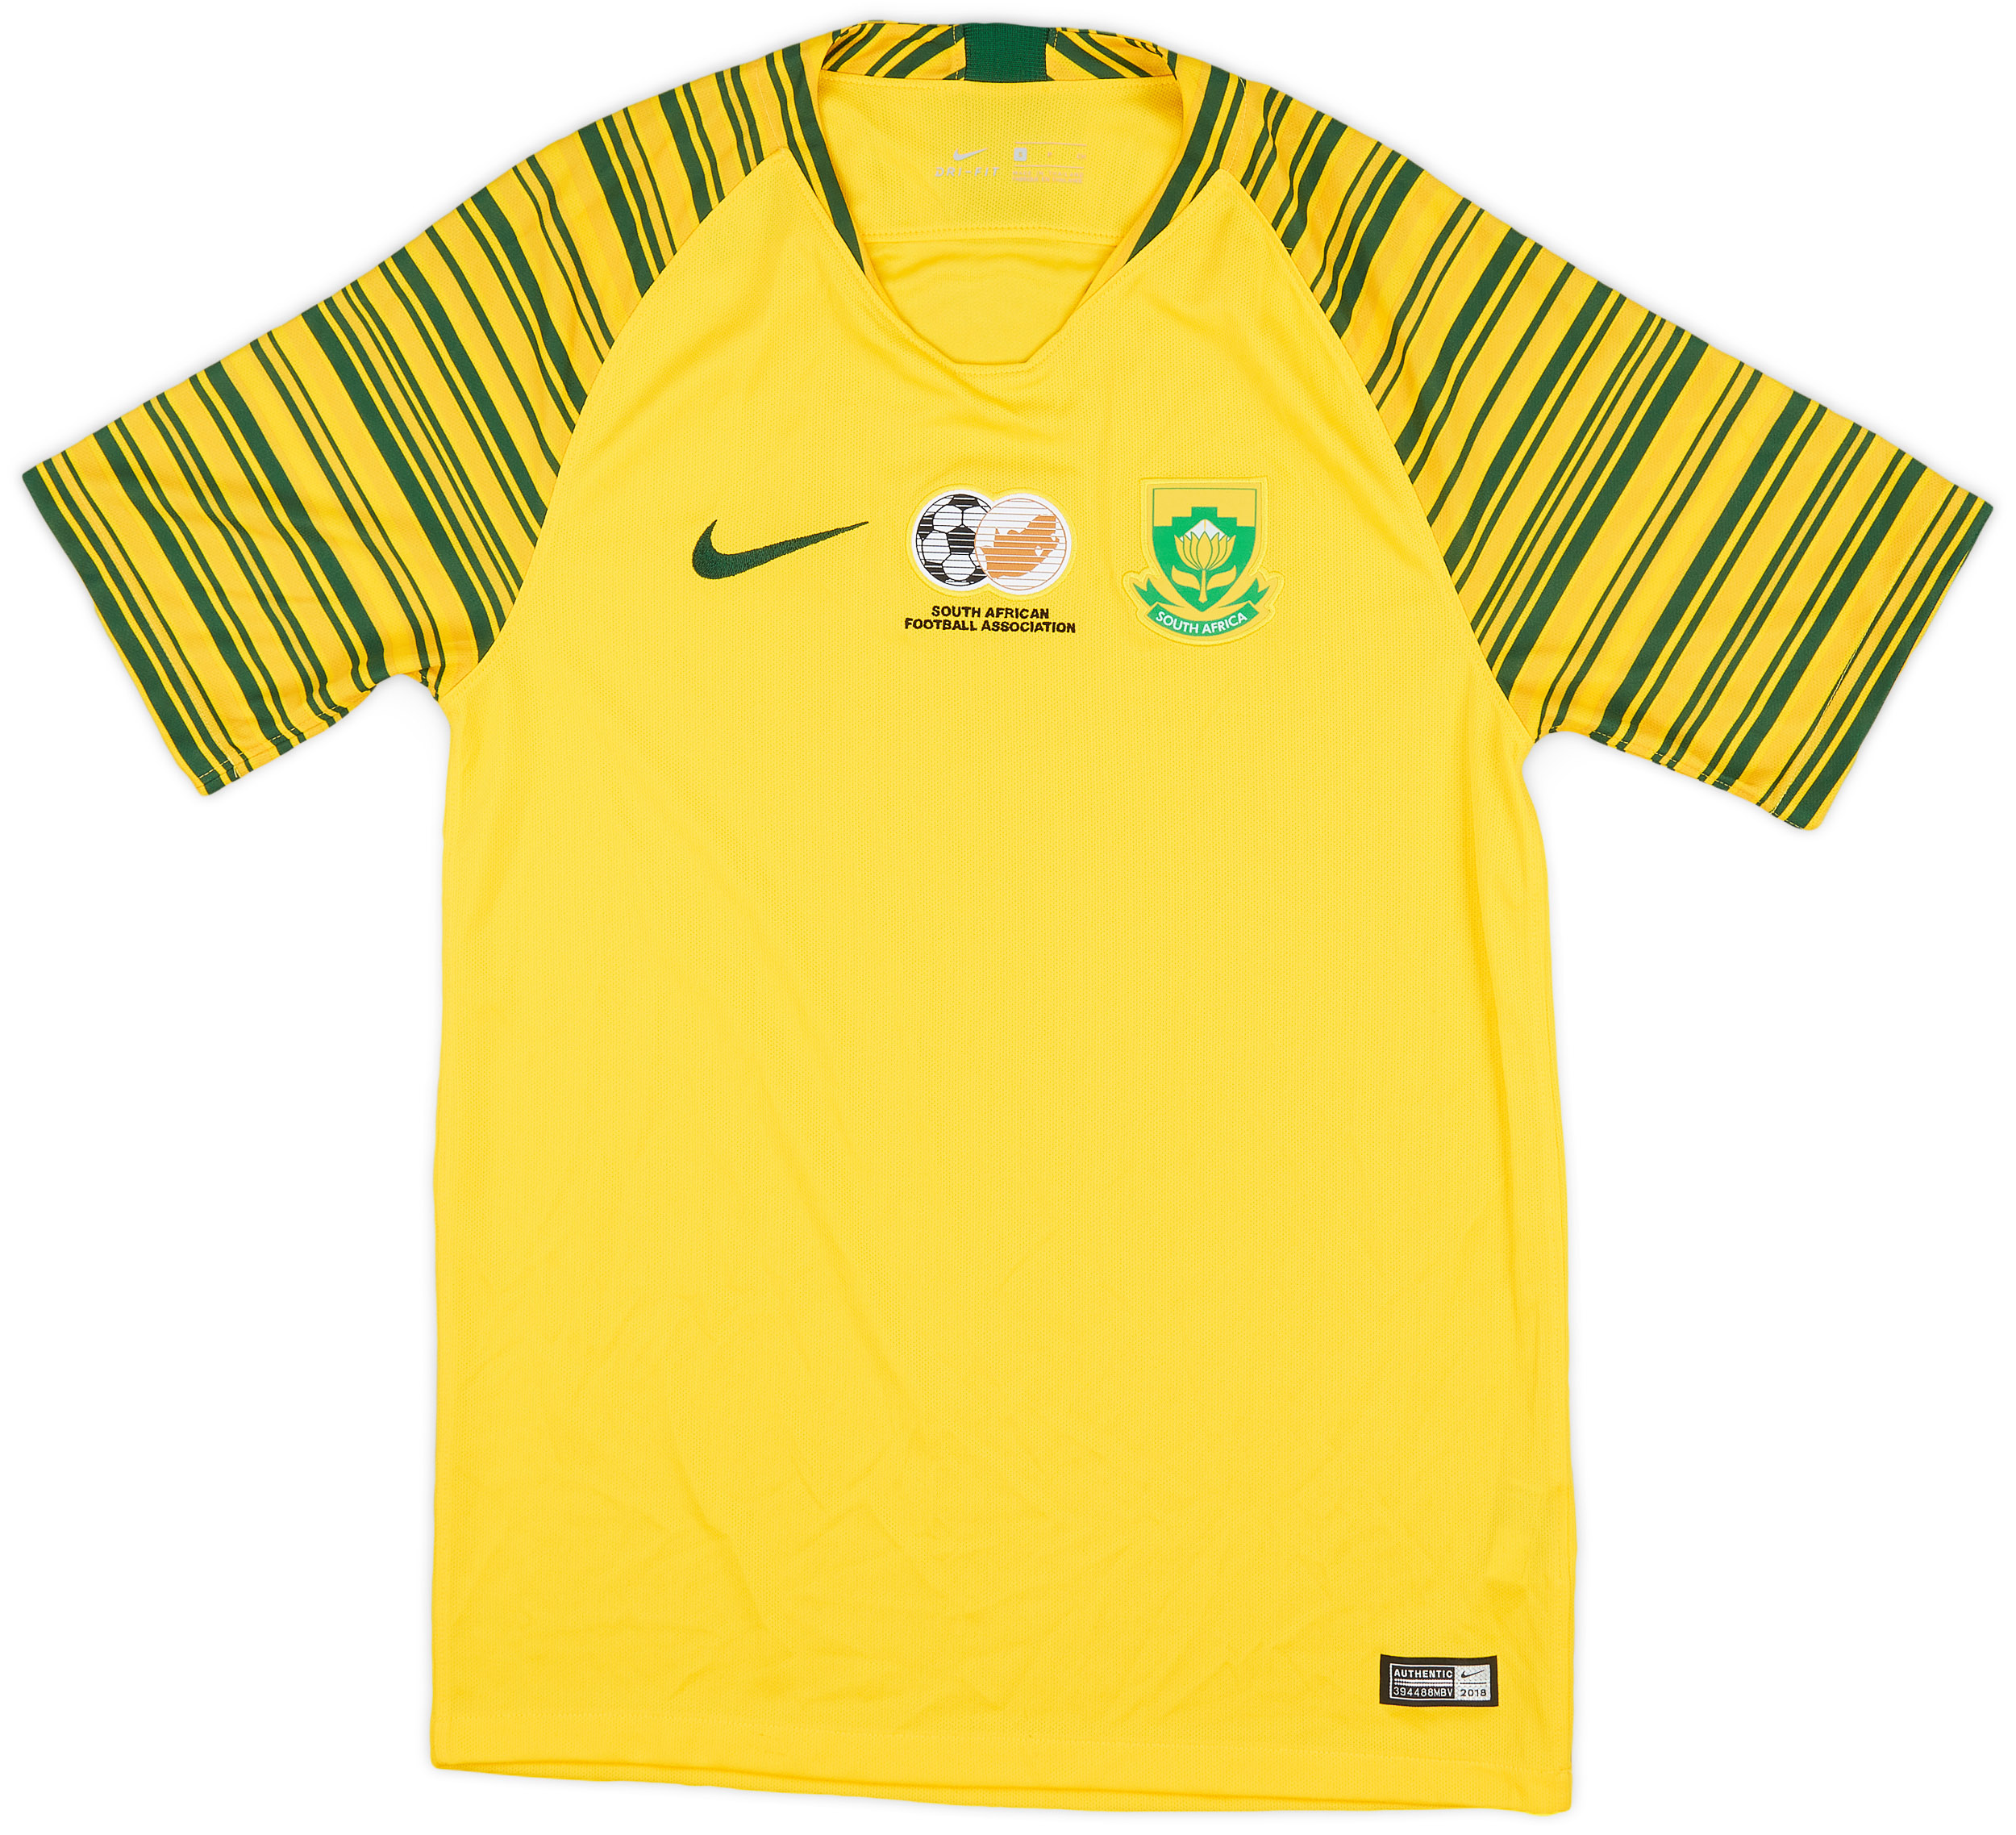 2018-20 South Africa Home Shirt - 9/10 - ()